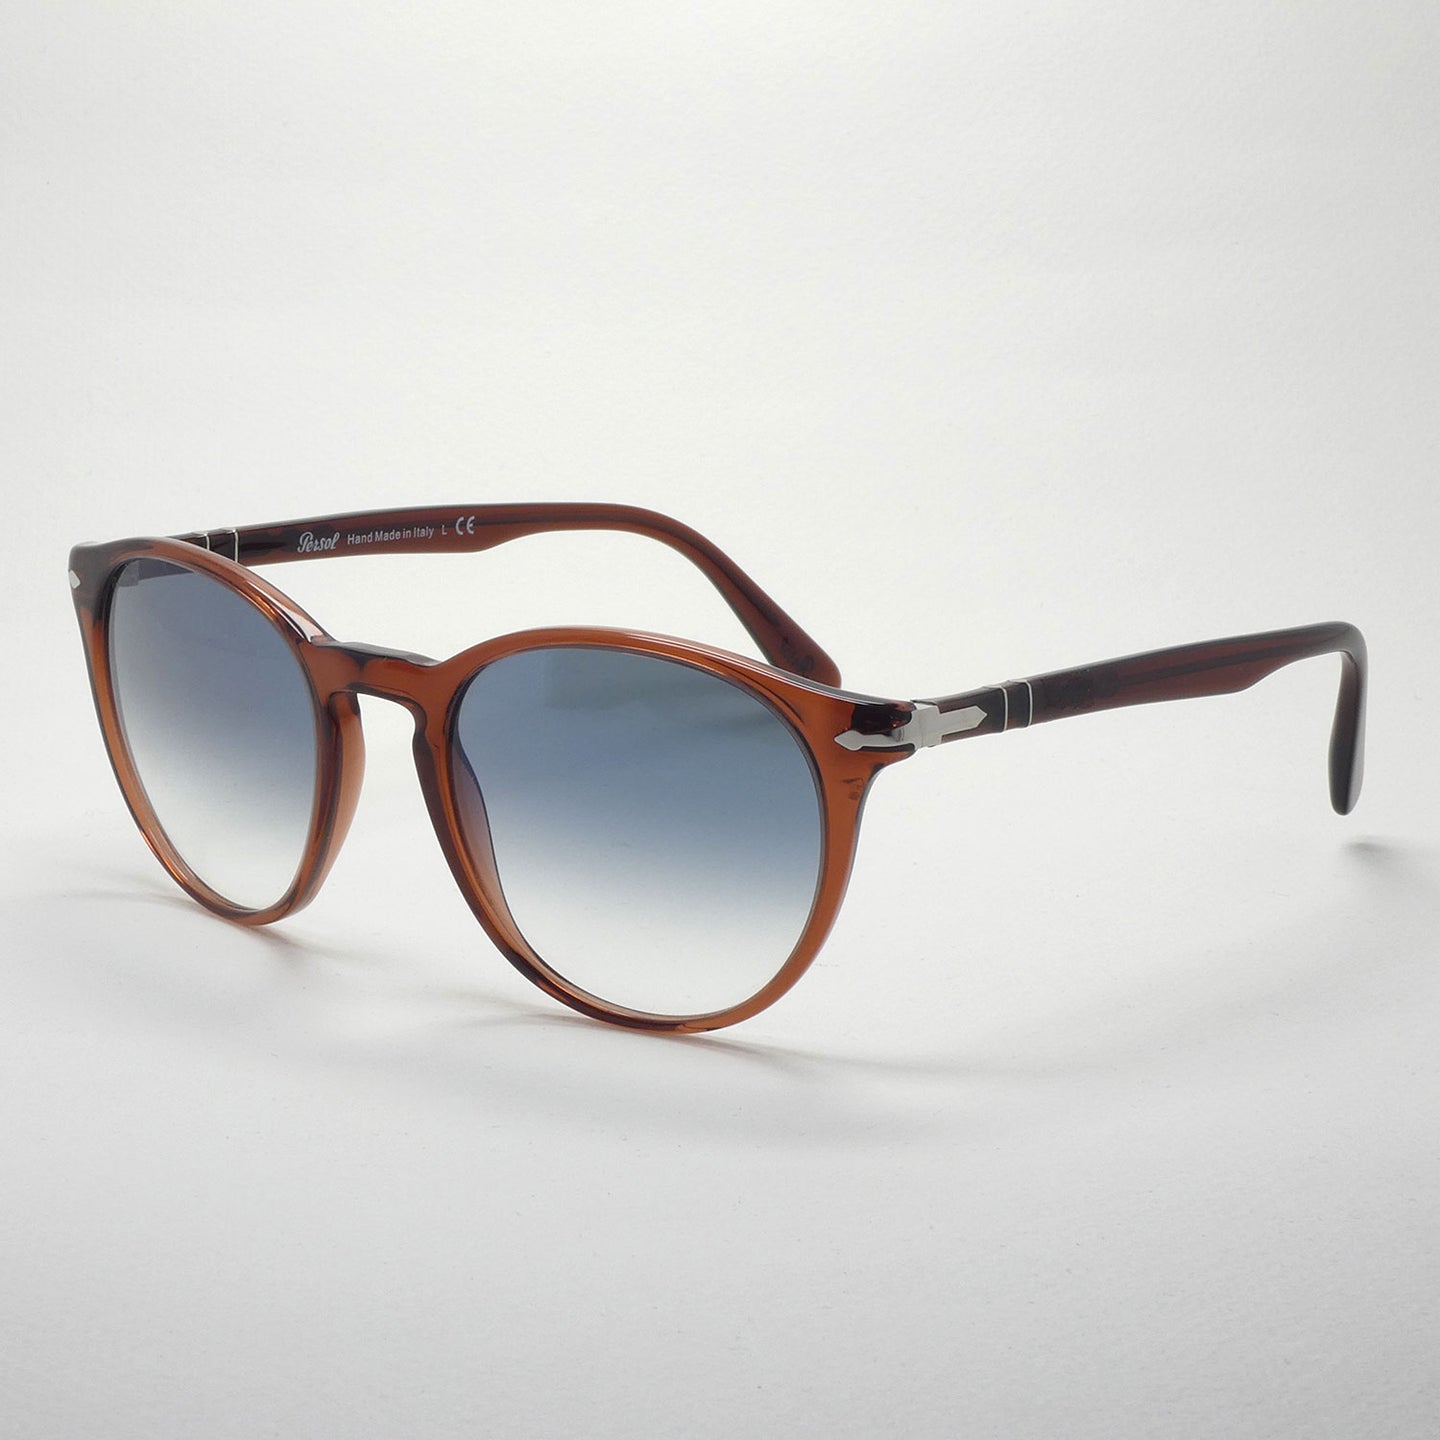 sunglasses persol 3152 9082/3f size 52 angled view